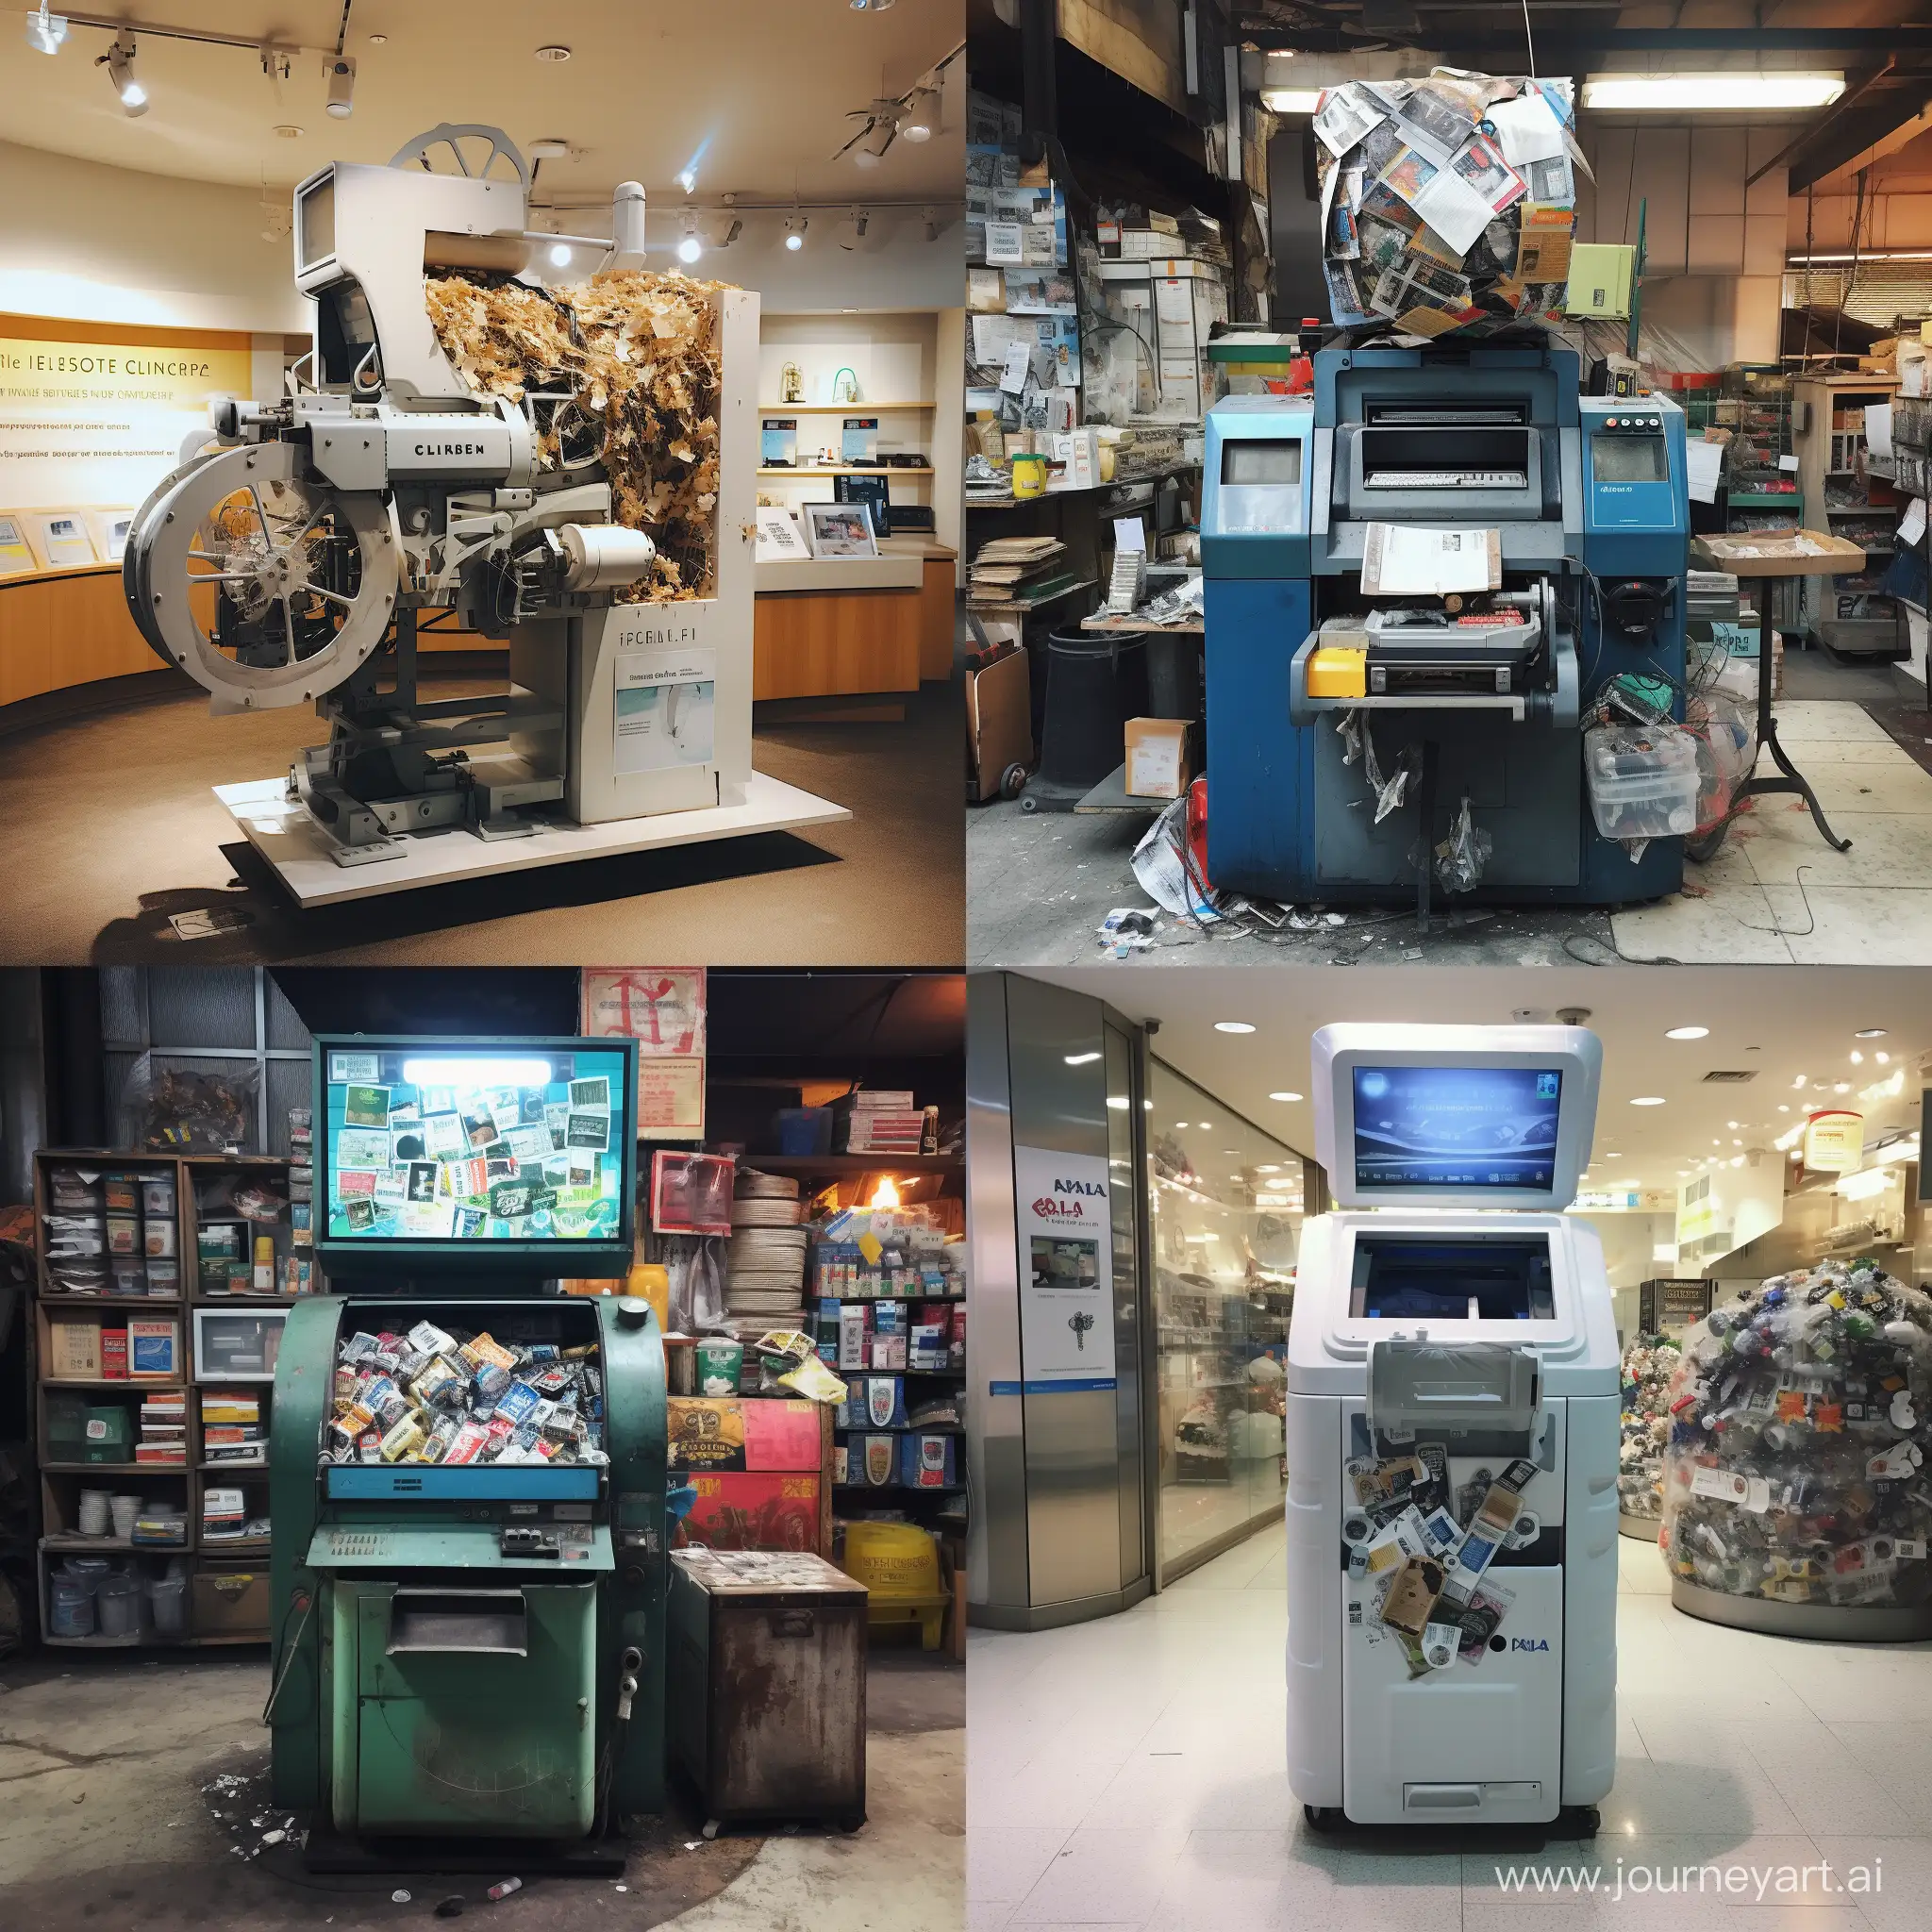 StateoftheArt-Recycling-Machine-in-a-Modern-Store